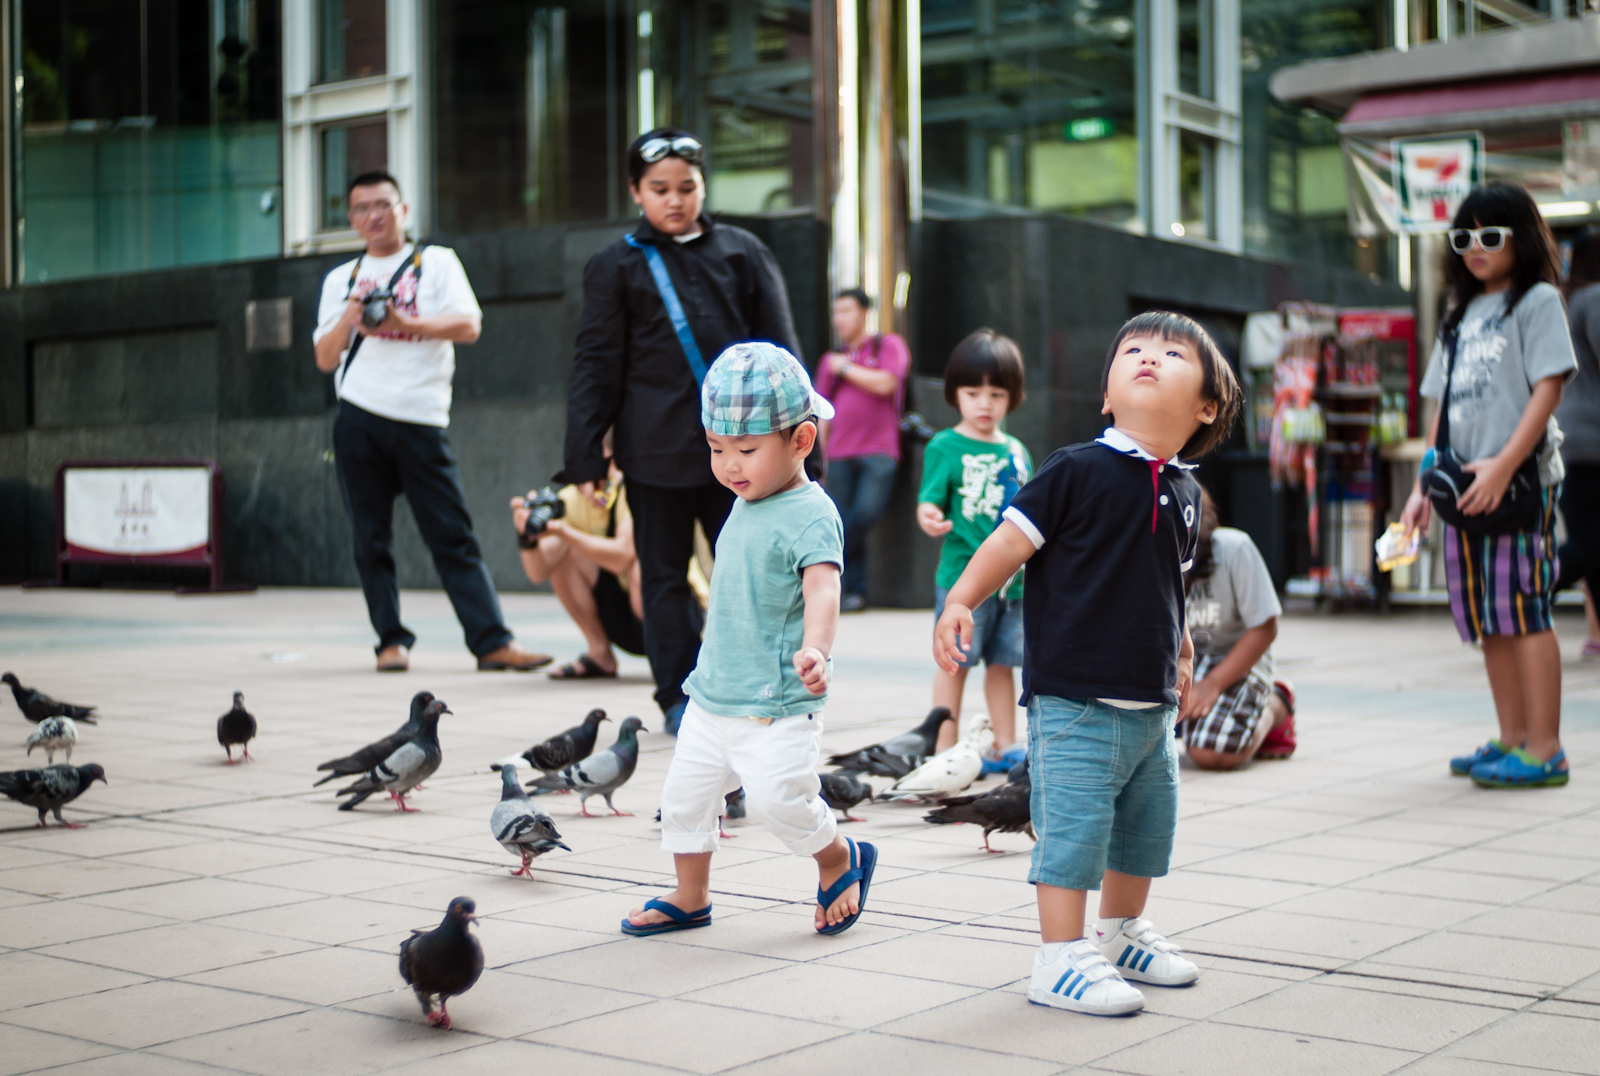 Children chasing pigeons in Orchard Road